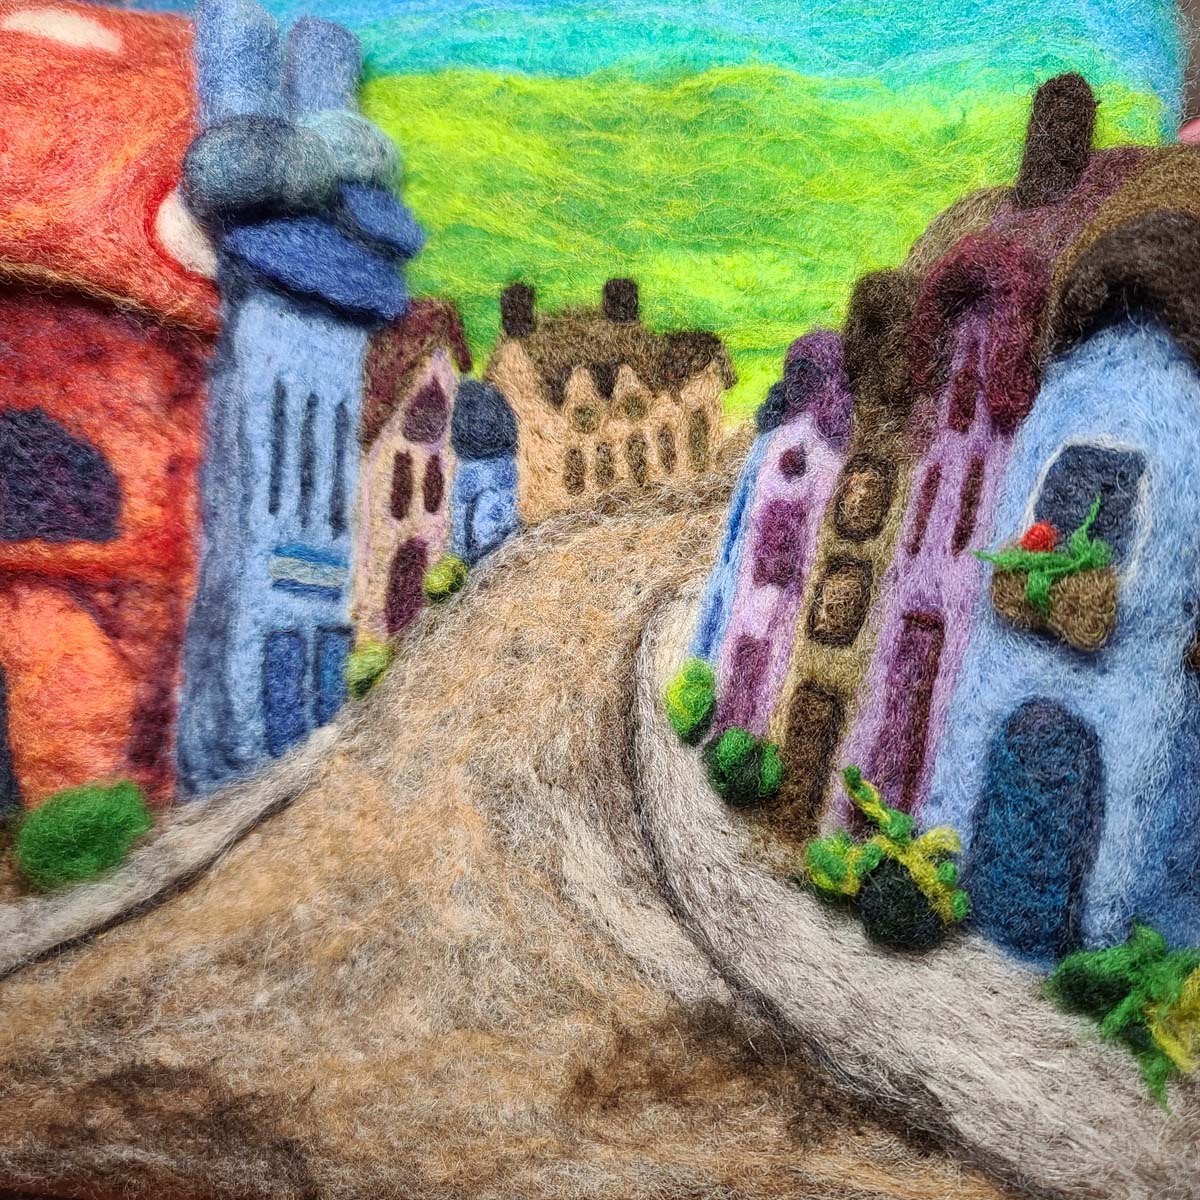 felting buildings and structures